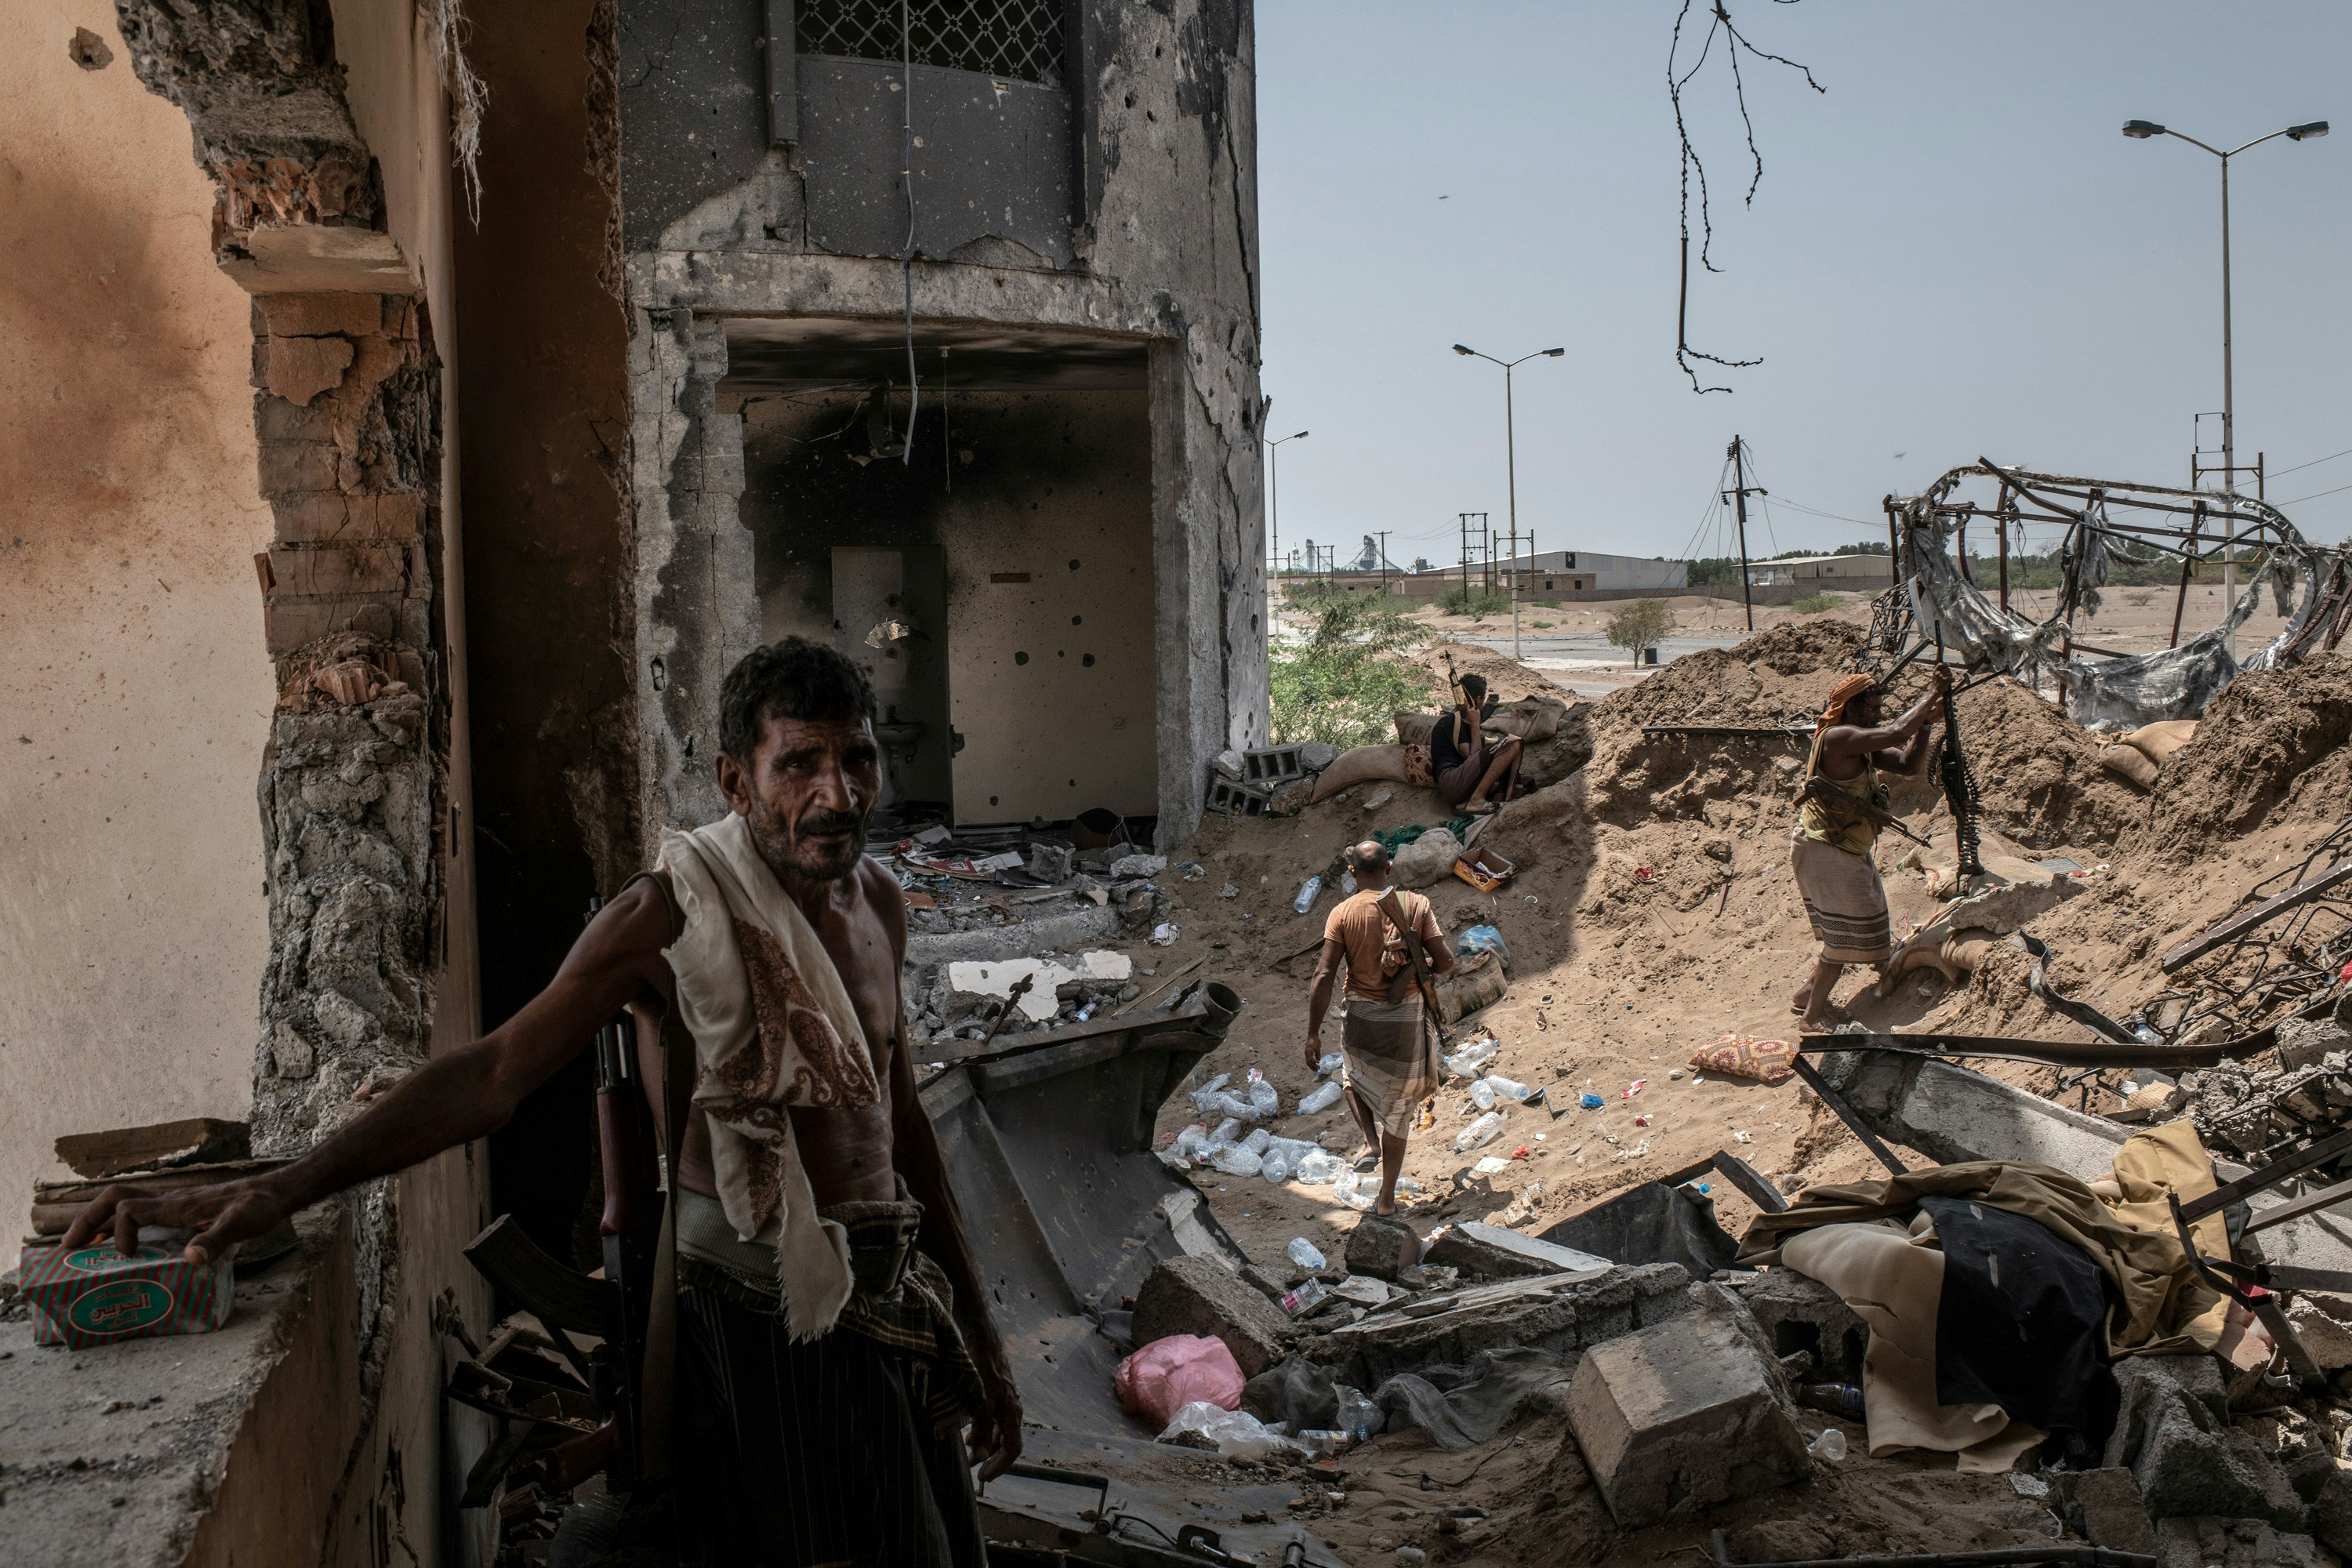 HODEIDAH, YEMEN - SEPTEMBER 21: Yemeni fighters aligned with Yemen's Saudi-led coalition-backed government, man a frontline position at Kilo 16, an area which contains the main supply route linking Hodeidah city to the rebel-held capital Sanaa, on September 21, 2018 in Hodeidah, Yemen. A coalition military campaign has moved west along Yemen's coast toward Hodeidah, where increasingly bloody battles have killed hundreds since June, putting the country's fragile food supply at risk. (Photo by Andrew Renneisen/Getty Images)